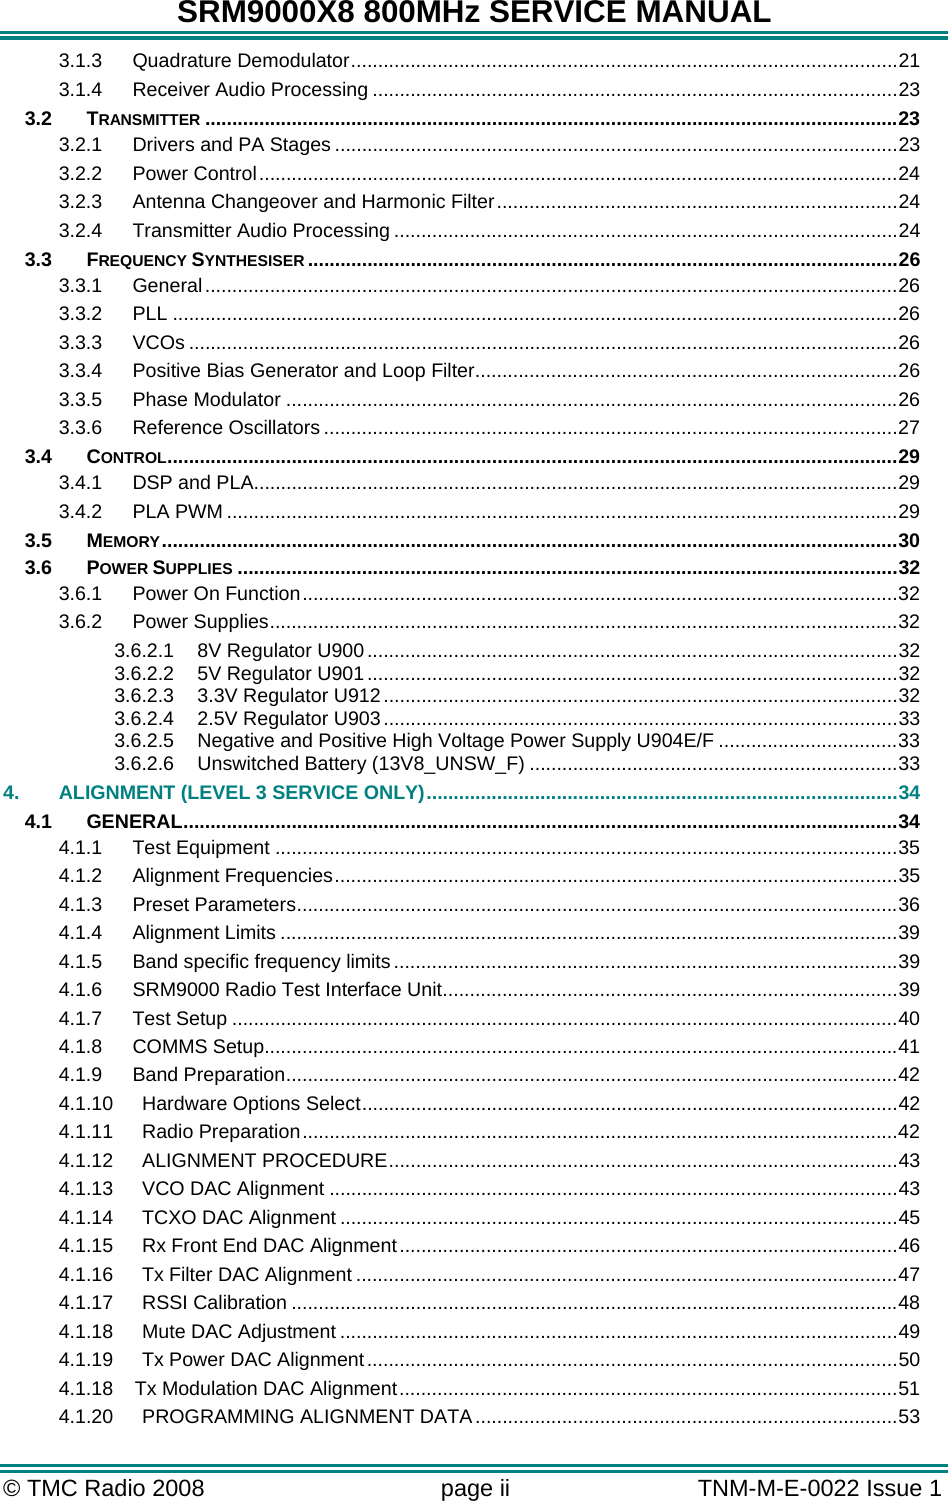 SRM9000X8 800MHz SERVICE MANUAL © TMC Radio 2008  page ii   TNM-M-E-0022 Issue 1  3.1.3 Quadrature Demodulator.....................................................................................................21 3.1.4 Receiver Audio Processing .................................................................................................23 3.2 TRANSMITTER ................................................................................................................................23 3.2.1 Drivers and PA Stages ........................................................................................................23 3.2.2 Power Control......................................................................................................................24 3.2.3 Antenna Changeover and Harmonic Filter..........................................................................24 3.2.4 Transmitter Audio Processing .............................................................................................24 3.3 FREQUENCY SYNTHESISER .............................................................................................................26 3.3.1 General................................................................................................................................26 3.3.2 PLL ......................................................................................................................................26 3.3.3 VCOs ...................................................................................................................................26 3.3.4 Positive Bias Generator and Loop Filter..............................................................................26 3.3.5 Phase Modulator .................................................................................................................26 3.3.6 Reference Oscillators ..........................................................................................................27 3.4 CONTROL.......................................................................................................................................29 3.4.1 DSP and PLA.......................................................................................................................29 3.4.2 PLA PWM ............................................................................................................................29 3.5 MEMORY........................................................................................................................................30 3.6 POWER SUPPLIES ..........................................................................................................................32 3.6.1 Power On Function..............................................................................................................32 3.6.2 Power Supplies....................................................................................................................32 3.6.2.1 8V Regulator U900 ..................................................................................................32 3.6.2.2 5V Regulator U901 ..................................................................................................32 3.6.2.3 3.3V Regulator U912...............................................................................................32 3.6.2.4 2.5V Regulator U903...............................................................................................33 3.6.2.5 Negative and Positive High Voltage Power Supply U904E/F .................................33 3.6.2.6 Unswitched Battery (13V8_UNSW_F) ....................................................................33 4. ALIGNMENT (LEVEL 3 SERVICE ONLY).......................................................................................34 4.1 GENERAL....................................................................................................................................34 4.1.1 Test Equipment ...................................................................................................................35 4.1.2 Alignment Frequencies........................................................................................................35 4.1.3 Preset Parameters...............................................................................................................36 4.1.4 Alignment Limits ..................................................................................................................39 4.1.5 Band specific frequency limits .............................................................................................39 4.1.6 SRM9000 Radio Test Interface Unit....................................................................................39 4.1.7 Test Setup ...........................................................................................................................40 4.1.8 COMMS Setup.....................................................................................................................41 4.1.9 Band Preparation.................................................................................................................42 4.1.10 Hardware Options Select...................................................................................................42 4.1.11 Radio Preparation..............................................................................................................42 4.1.12 ALIGNMENT PROCEDURE..............................................................................................43 4.1.13 VCO DAC Alignment .........................................................................................................43 4.1.14 TCXO DAC Alignment .......................................................................................................45 4.1.15 Rx Front End DAC Alignment............................................................................................46 4.1.16 Tx Filter DAC Alignment ....................................................................................................47 4.1.17 RSSI Calibration ................................................................................................................48 4.1.18 Mute DAC Adjustment .......................................................................................................49 4.1.19 Tx Power DAC Alignment ..................................................................................................50 4.1.18    Tx Modulation DAC Alignment............................................................................................51 4.1.20 PROGRAMMING ALIGNMENT DATA..............................................................................53 